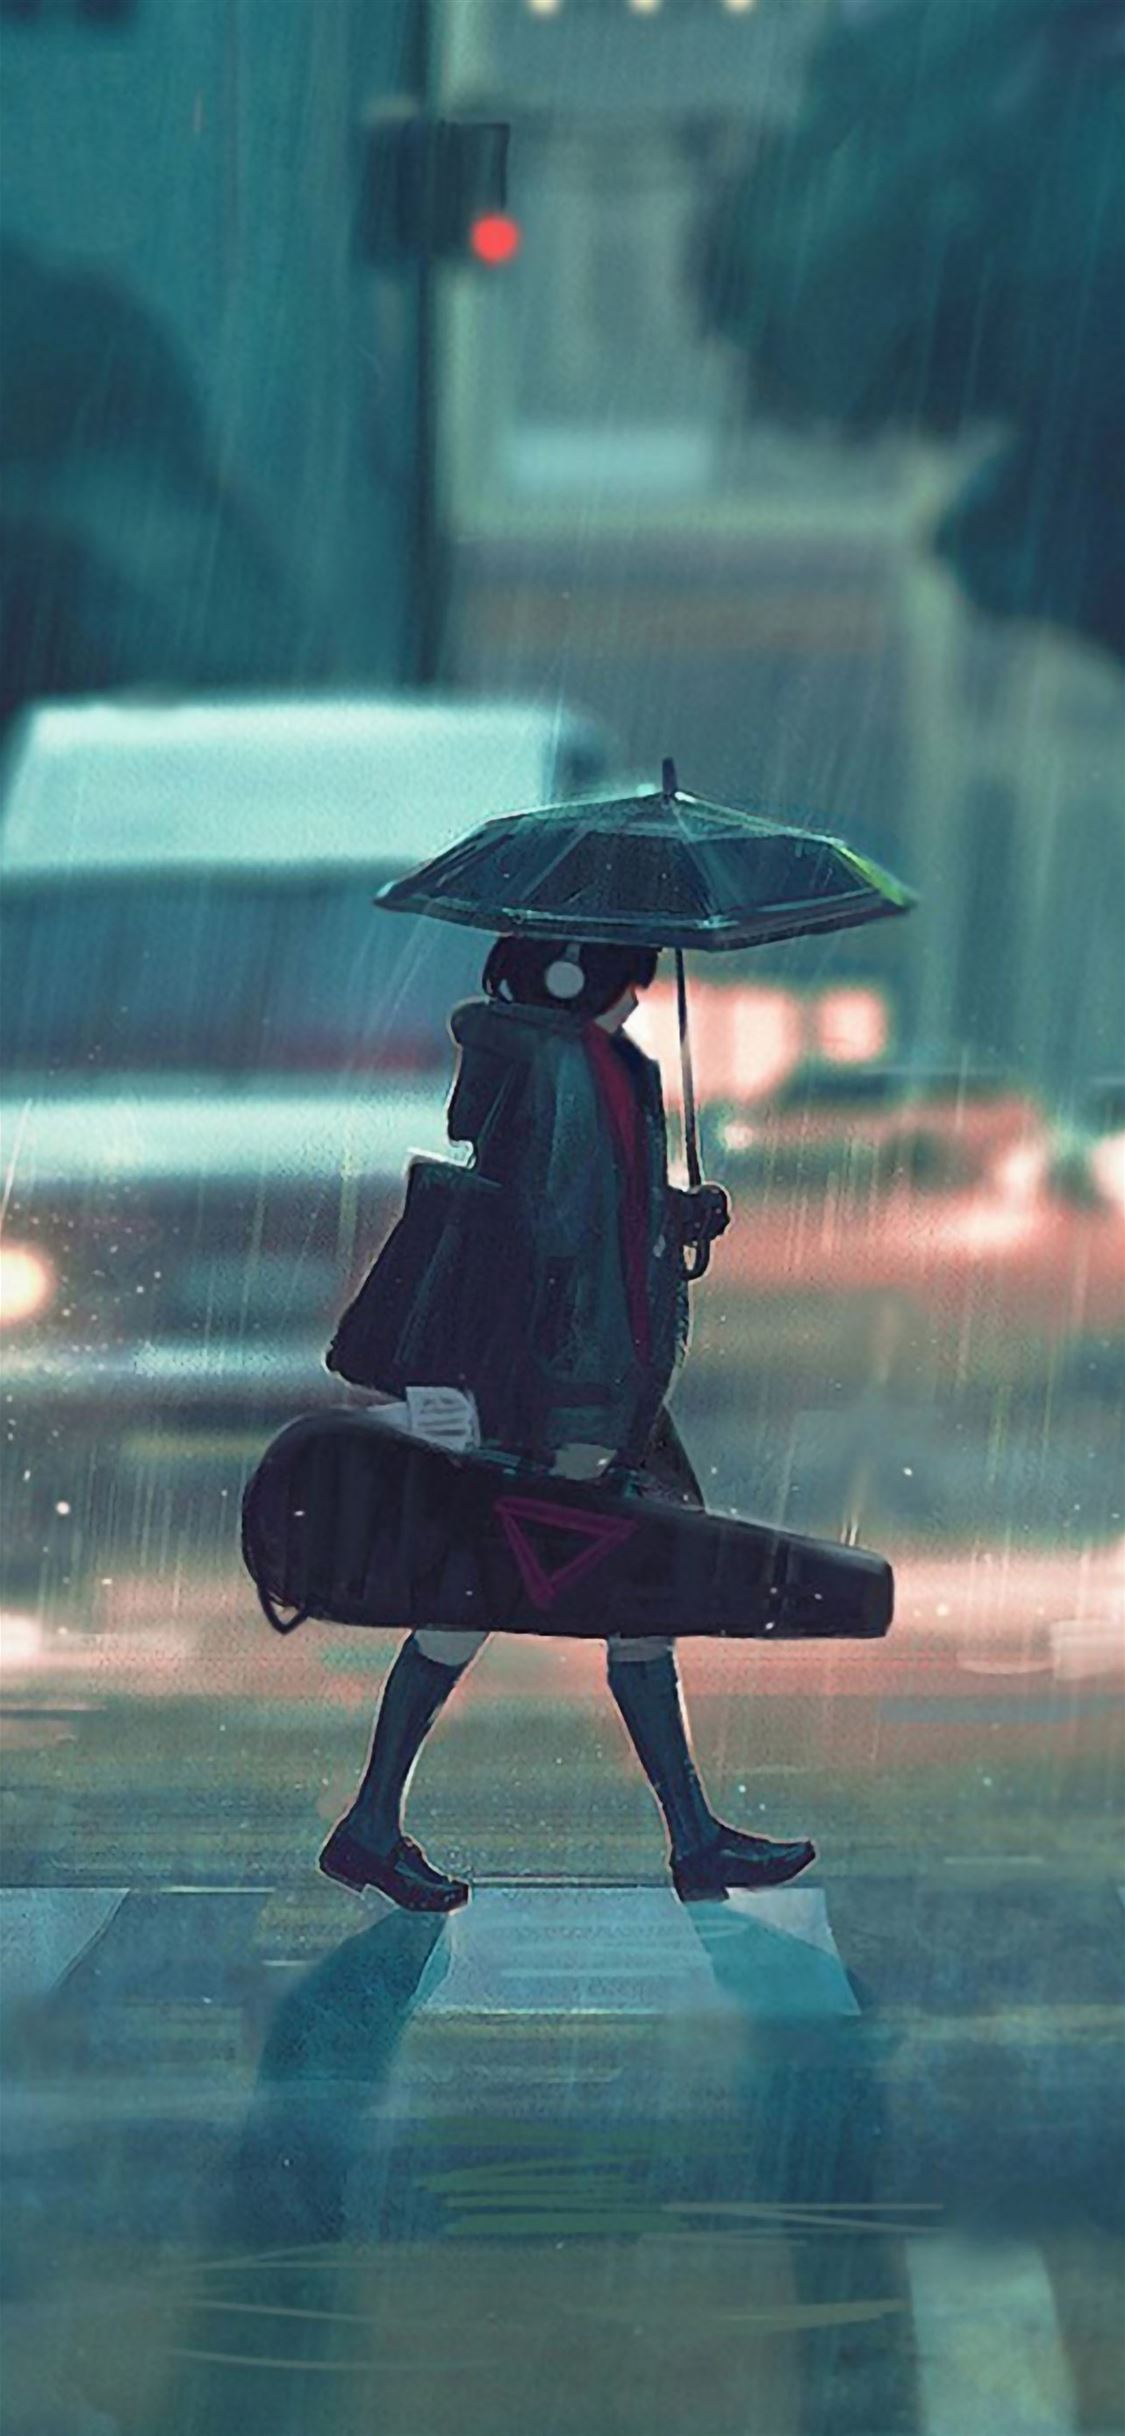 Rainy day anime girl iPhone Wallpapers Free Download